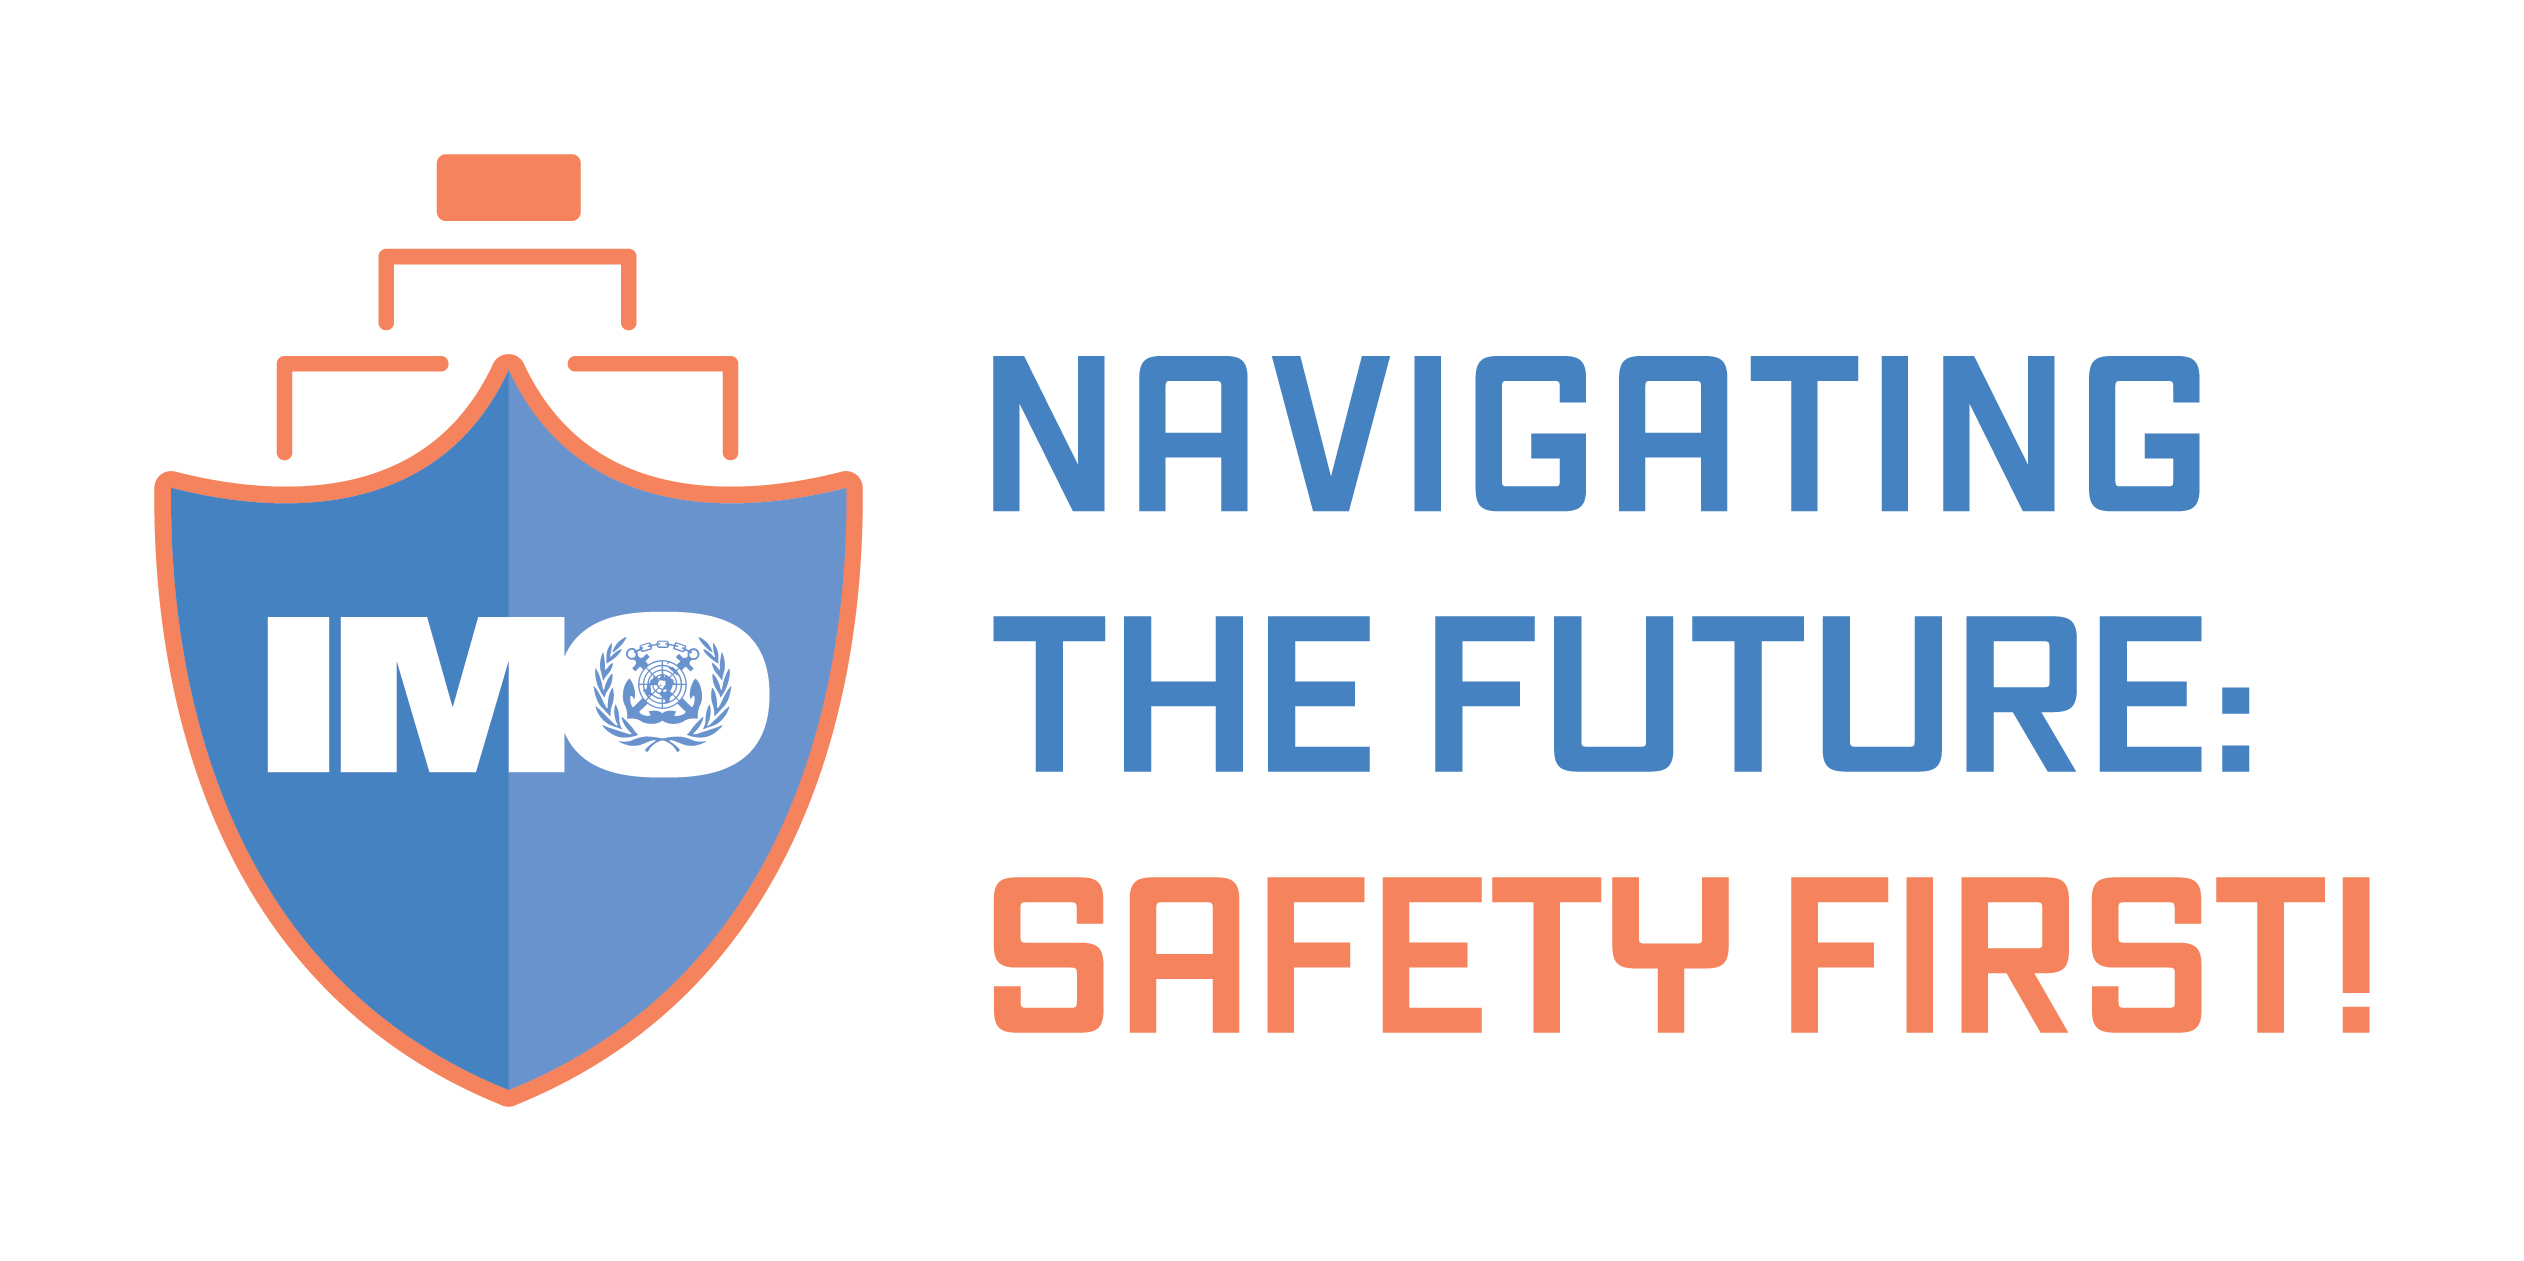 Navigating the Future: Safety First!